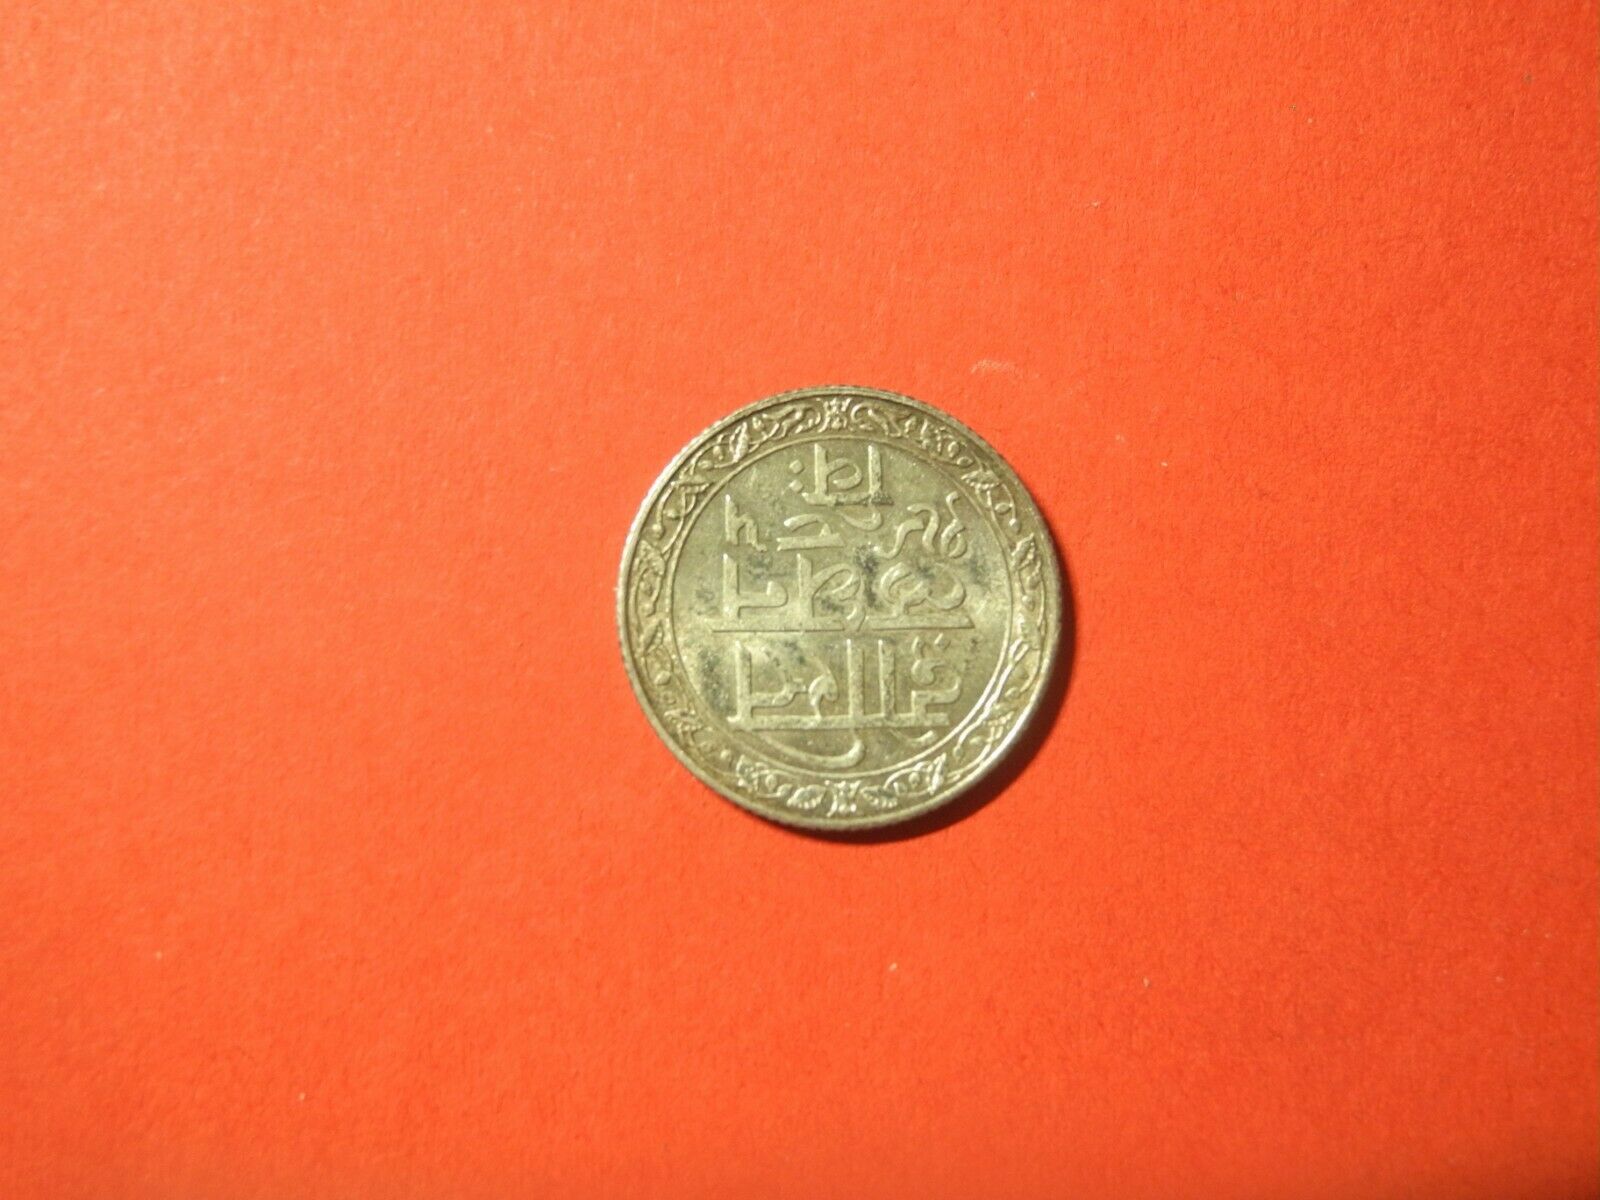 Ind119 - India (kutch) - 1/4 Rupee - 1938 - Silver